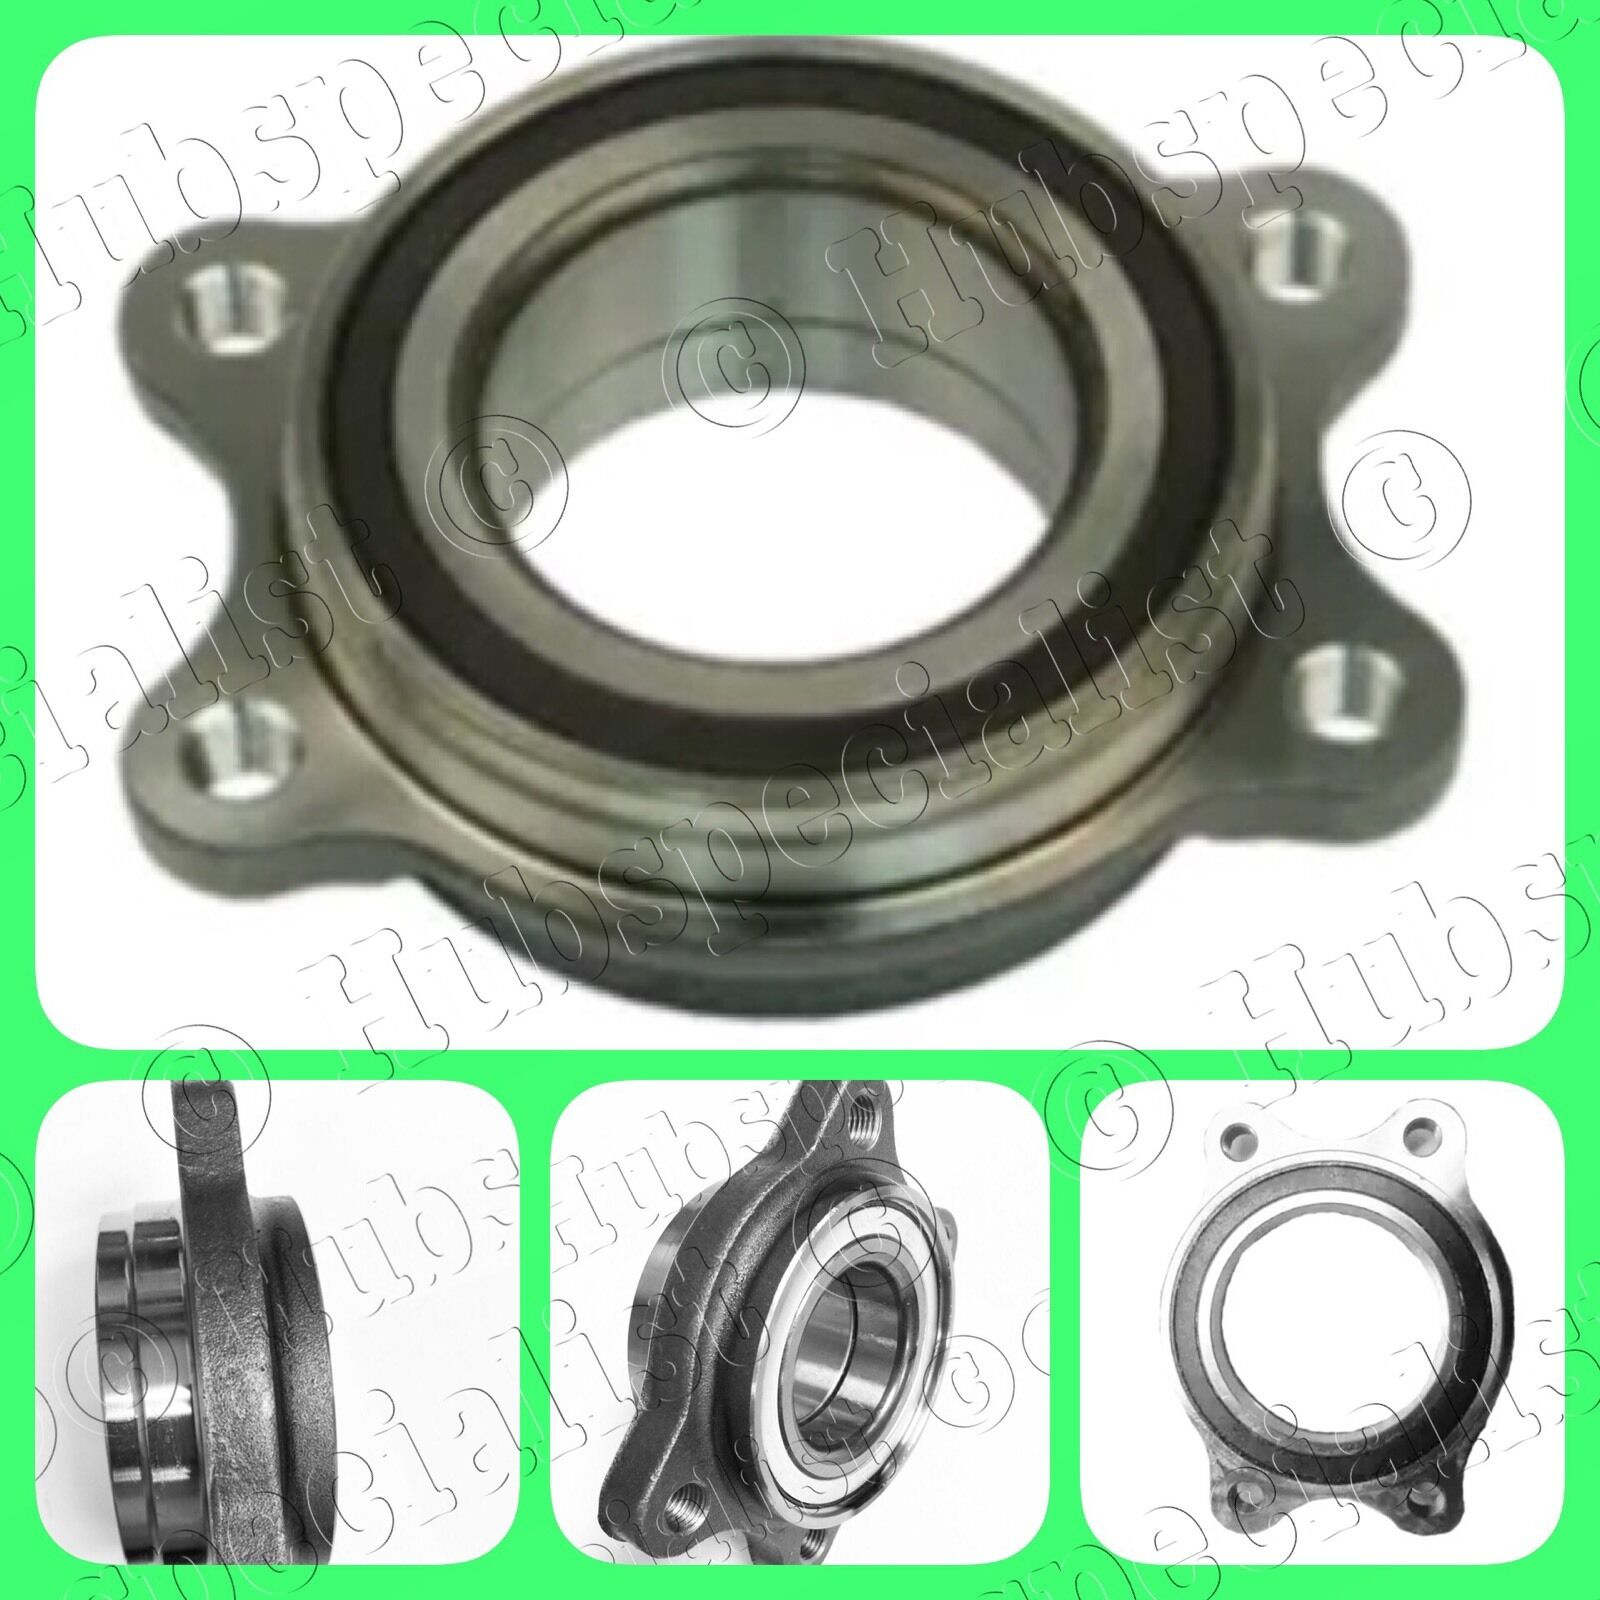 FRONT WHEEL BEARING FOR AUDI 2008-2014 A4 A5 A6 A7 A8 QUATTRO S4 S5 S6 S7 S8 